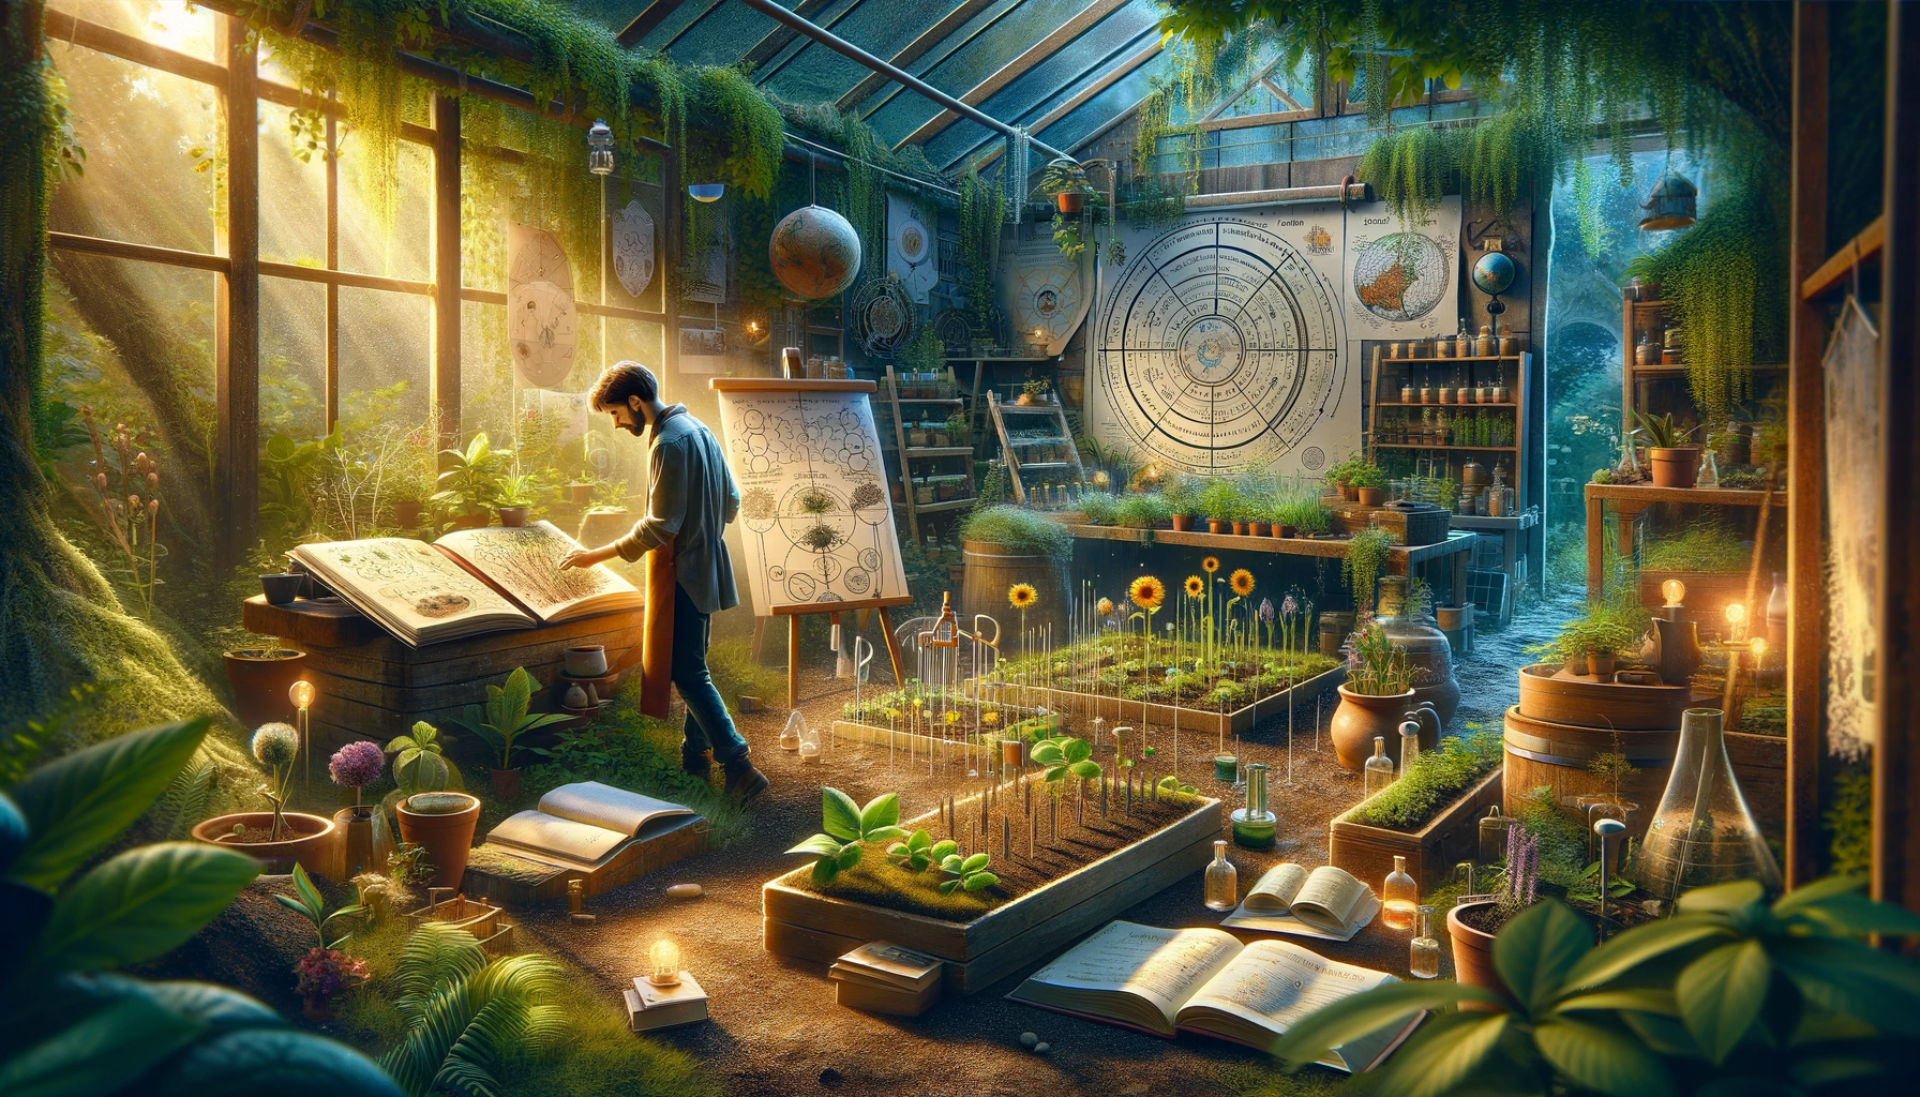 Understanding Biodynamic Gardening: The image depicts a person engaged in learning about biodynamic gardening. Surrounded by relevant materials in a lush environment, the scene conveys a sense of curiosity and dedication to understanding the principles and practices of biodynamic gardening.